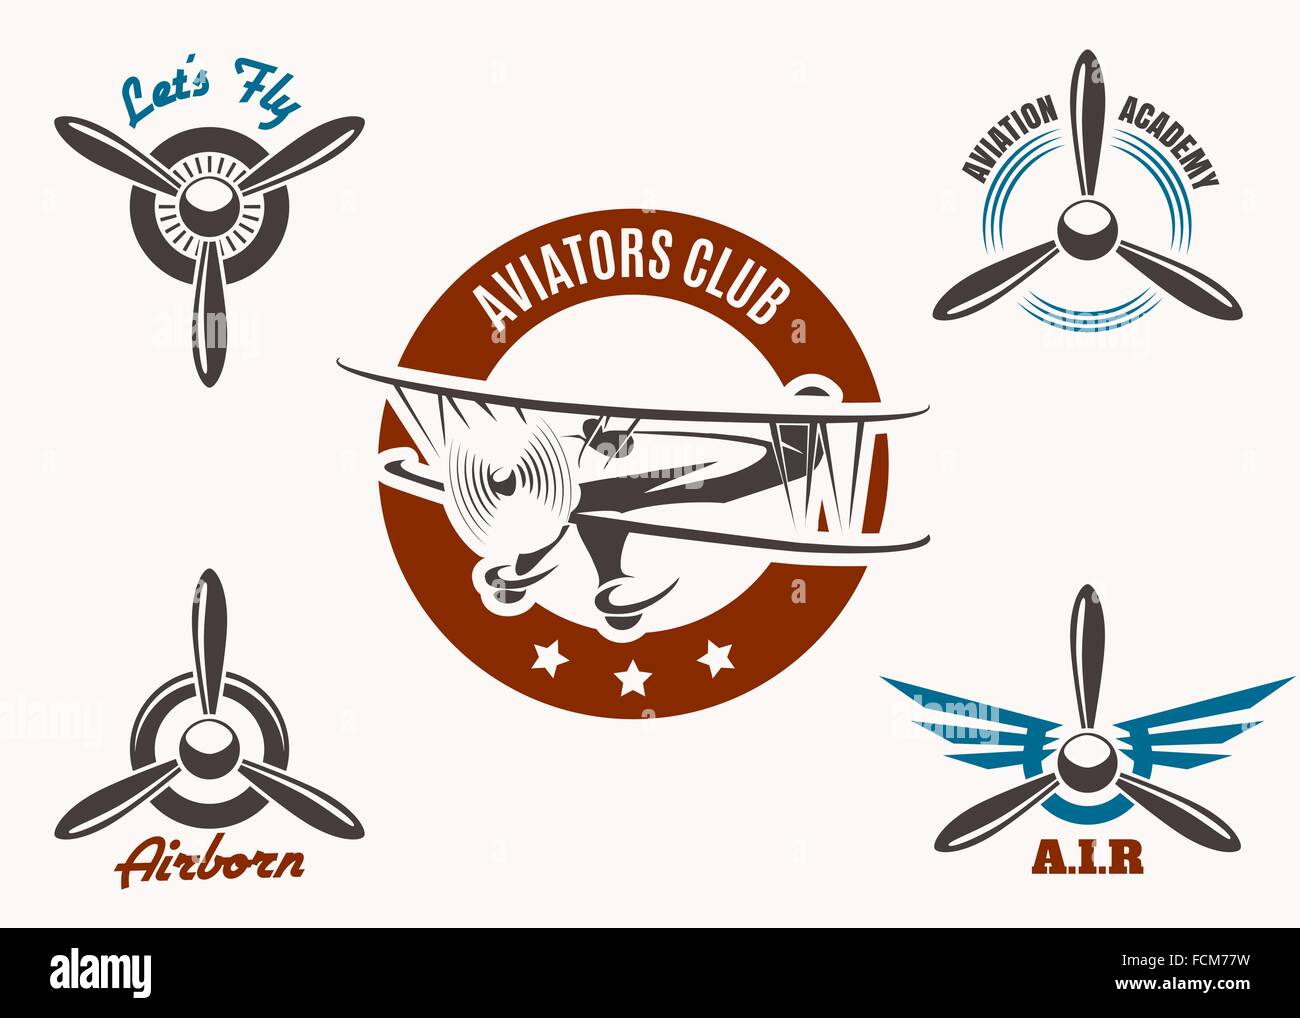 Retro aviation and pilot club badge and label set. Free font used. Isolated on white. Stock Vector